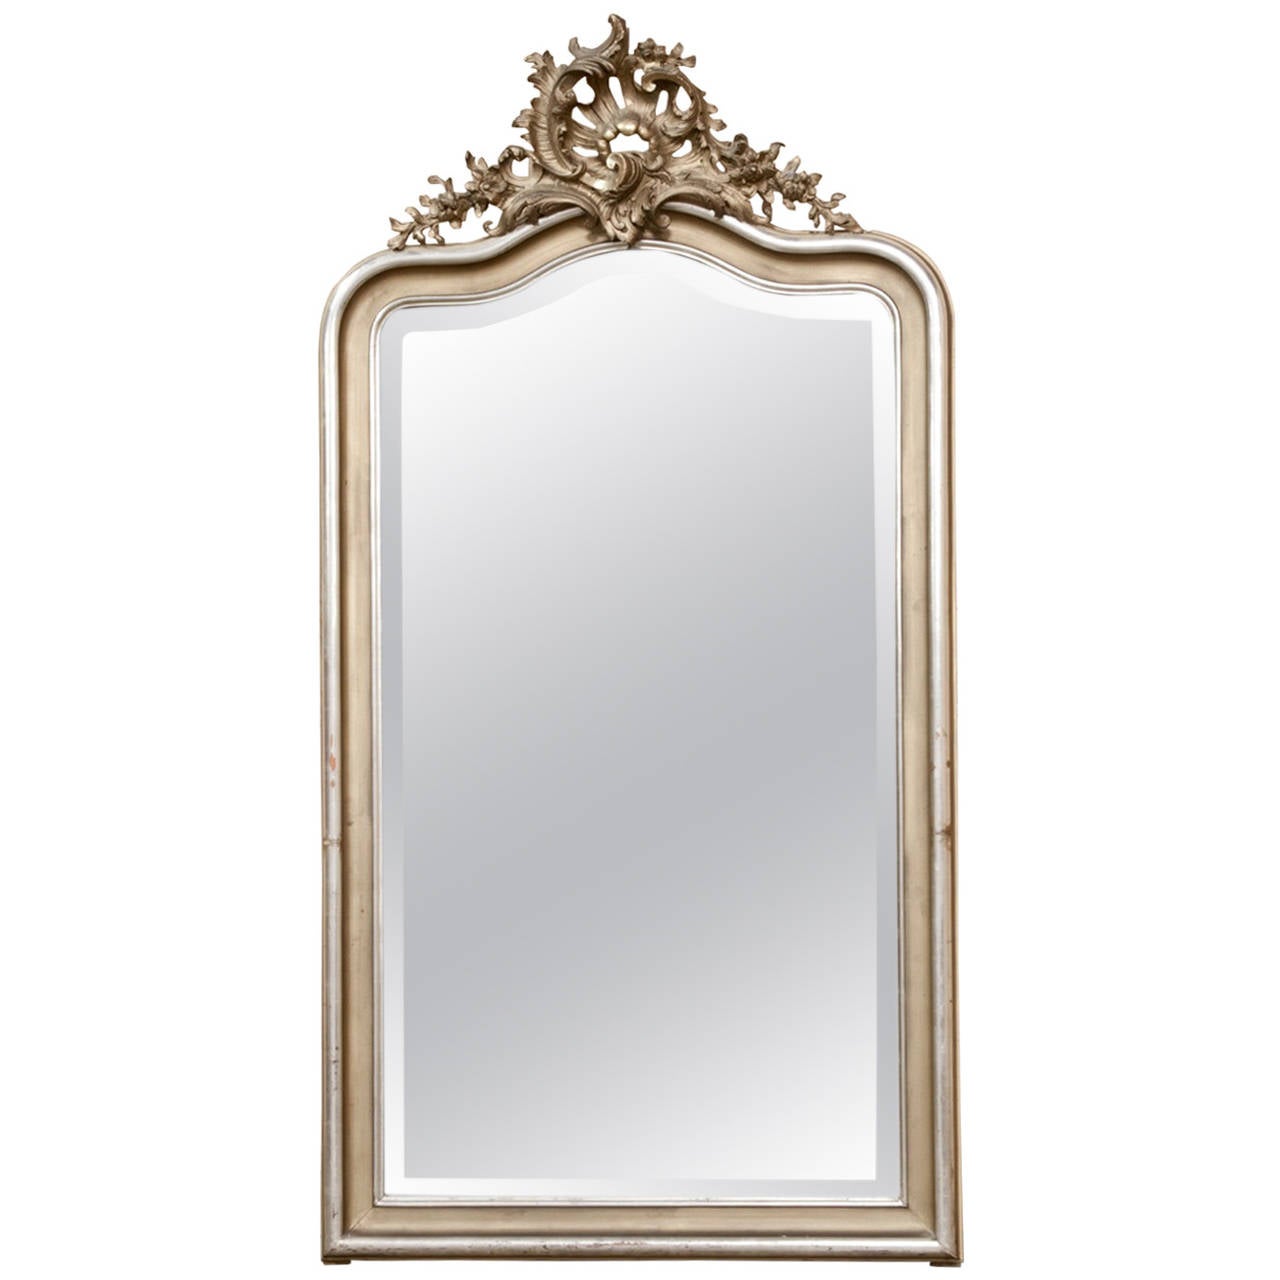 19th Century French Rococo Giltwood Mirror with Silver Leaf at 1stdibs